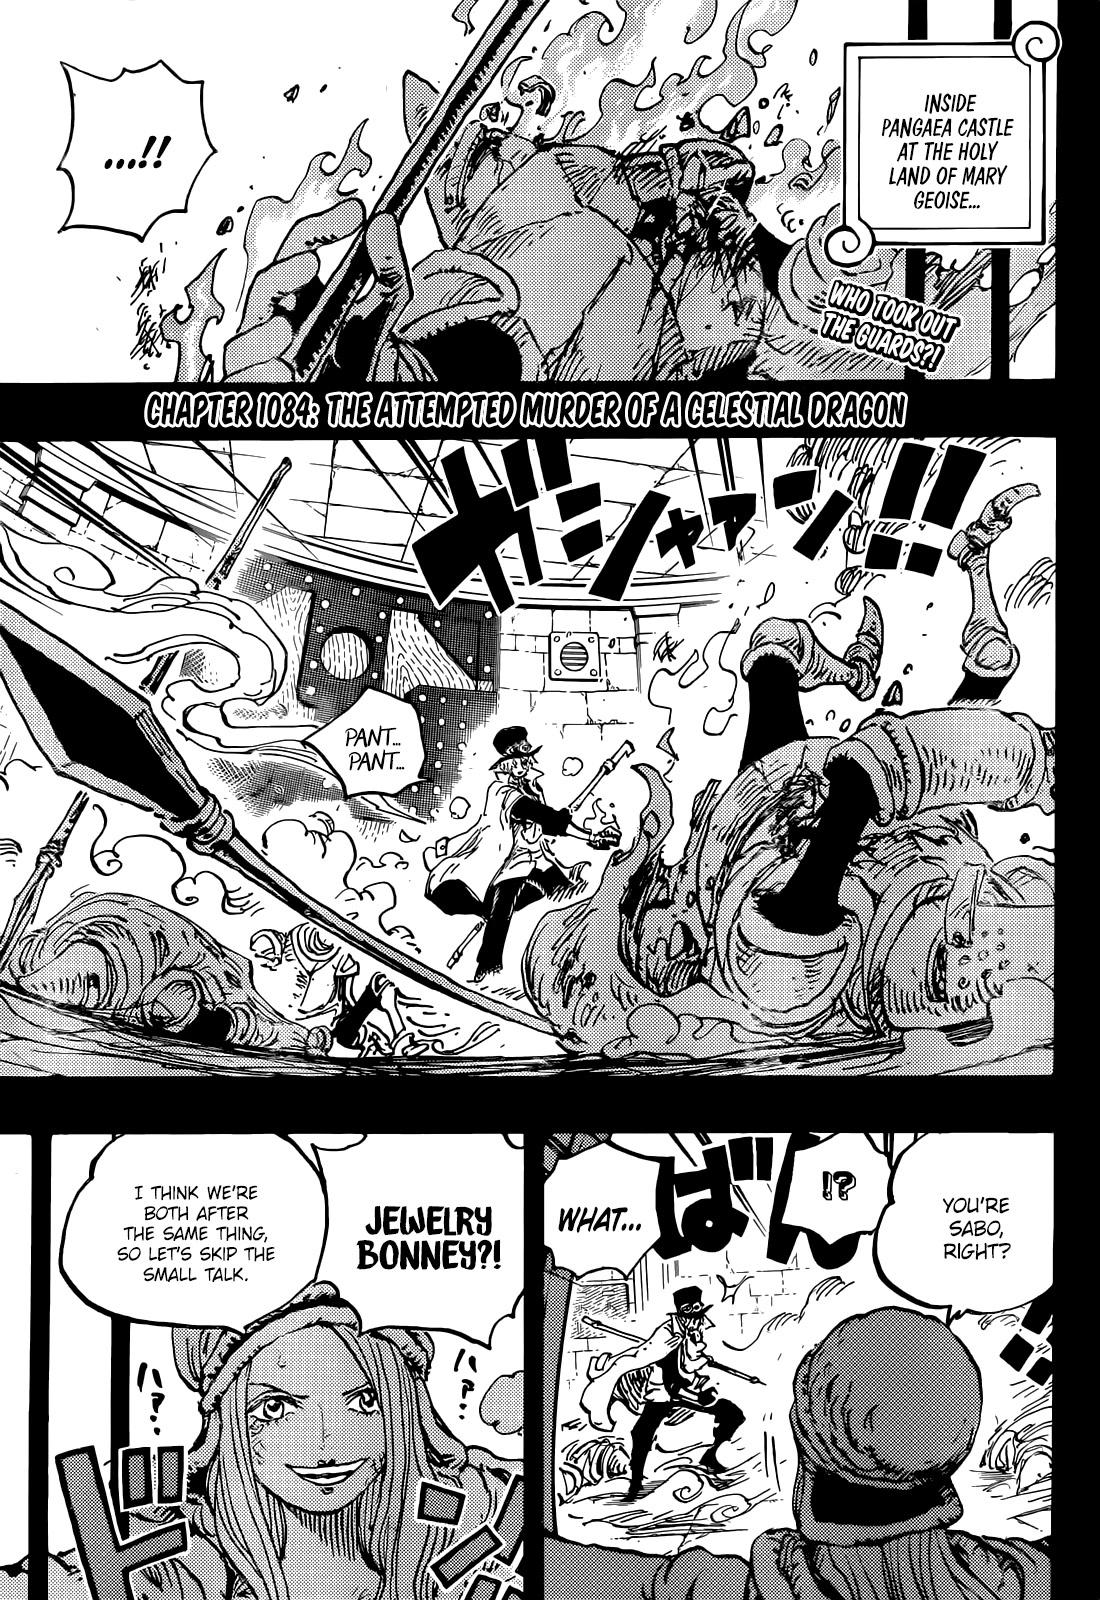 One Piece Chapter 1084: The Attempted Murder Of A Celestial Dragon page 4 - Mangakakalot